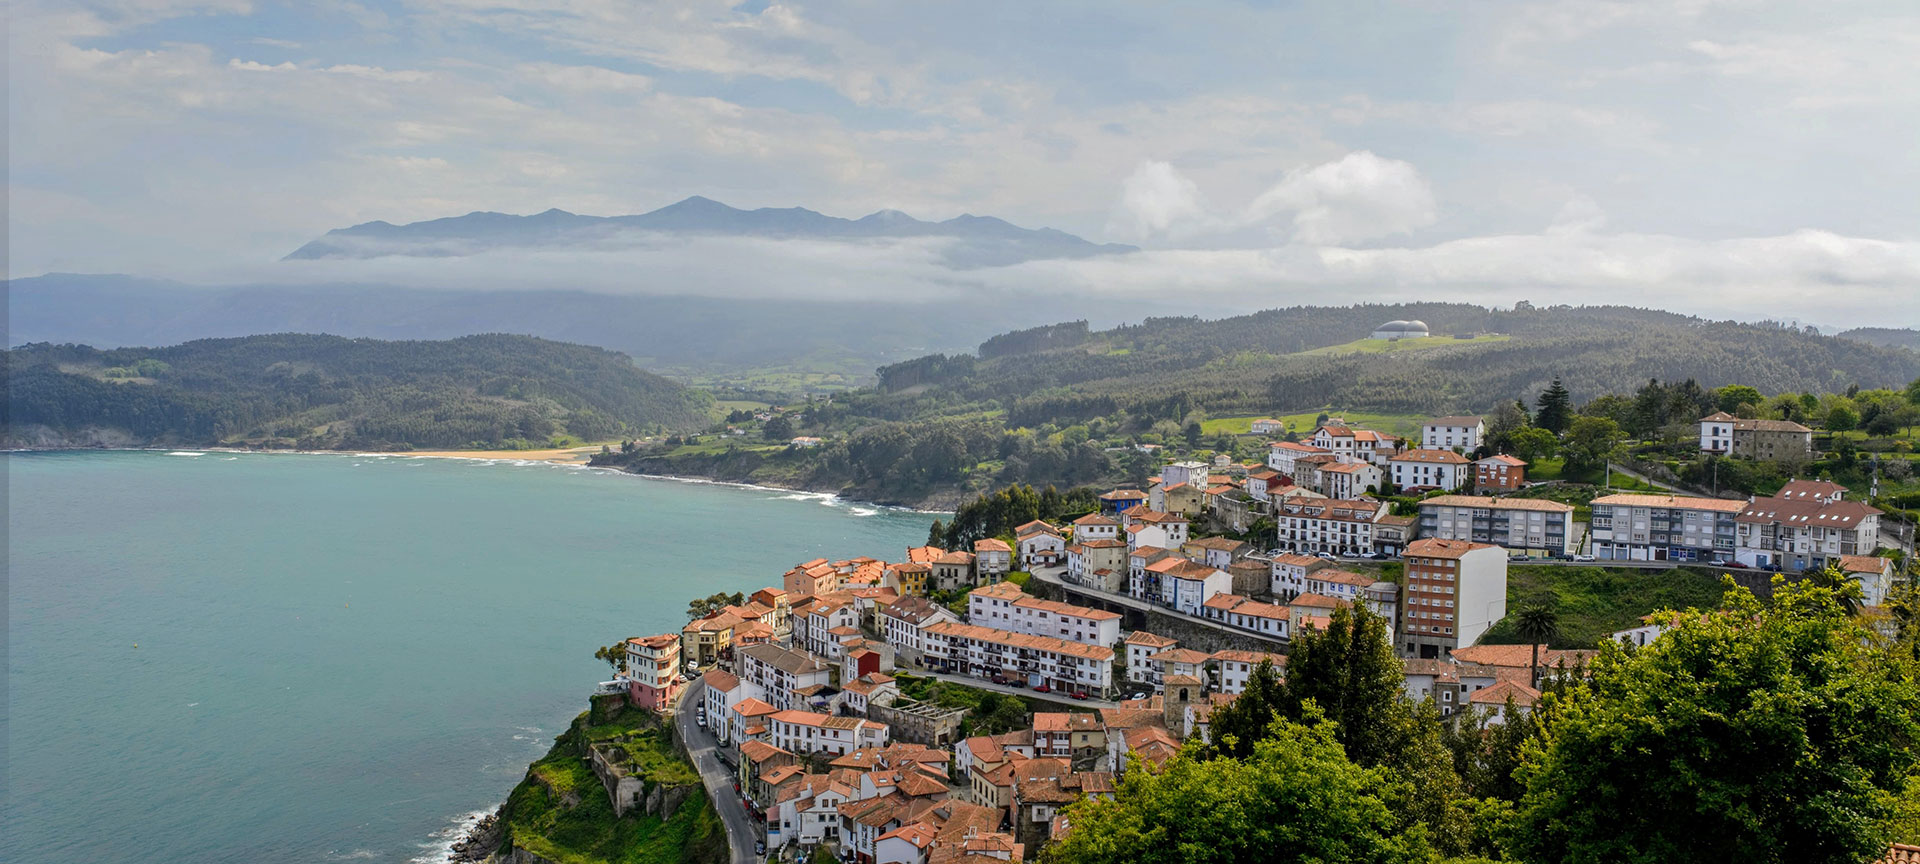 View of Lastres with the sea and Los Picos de Europa mountains in the background. Asturias